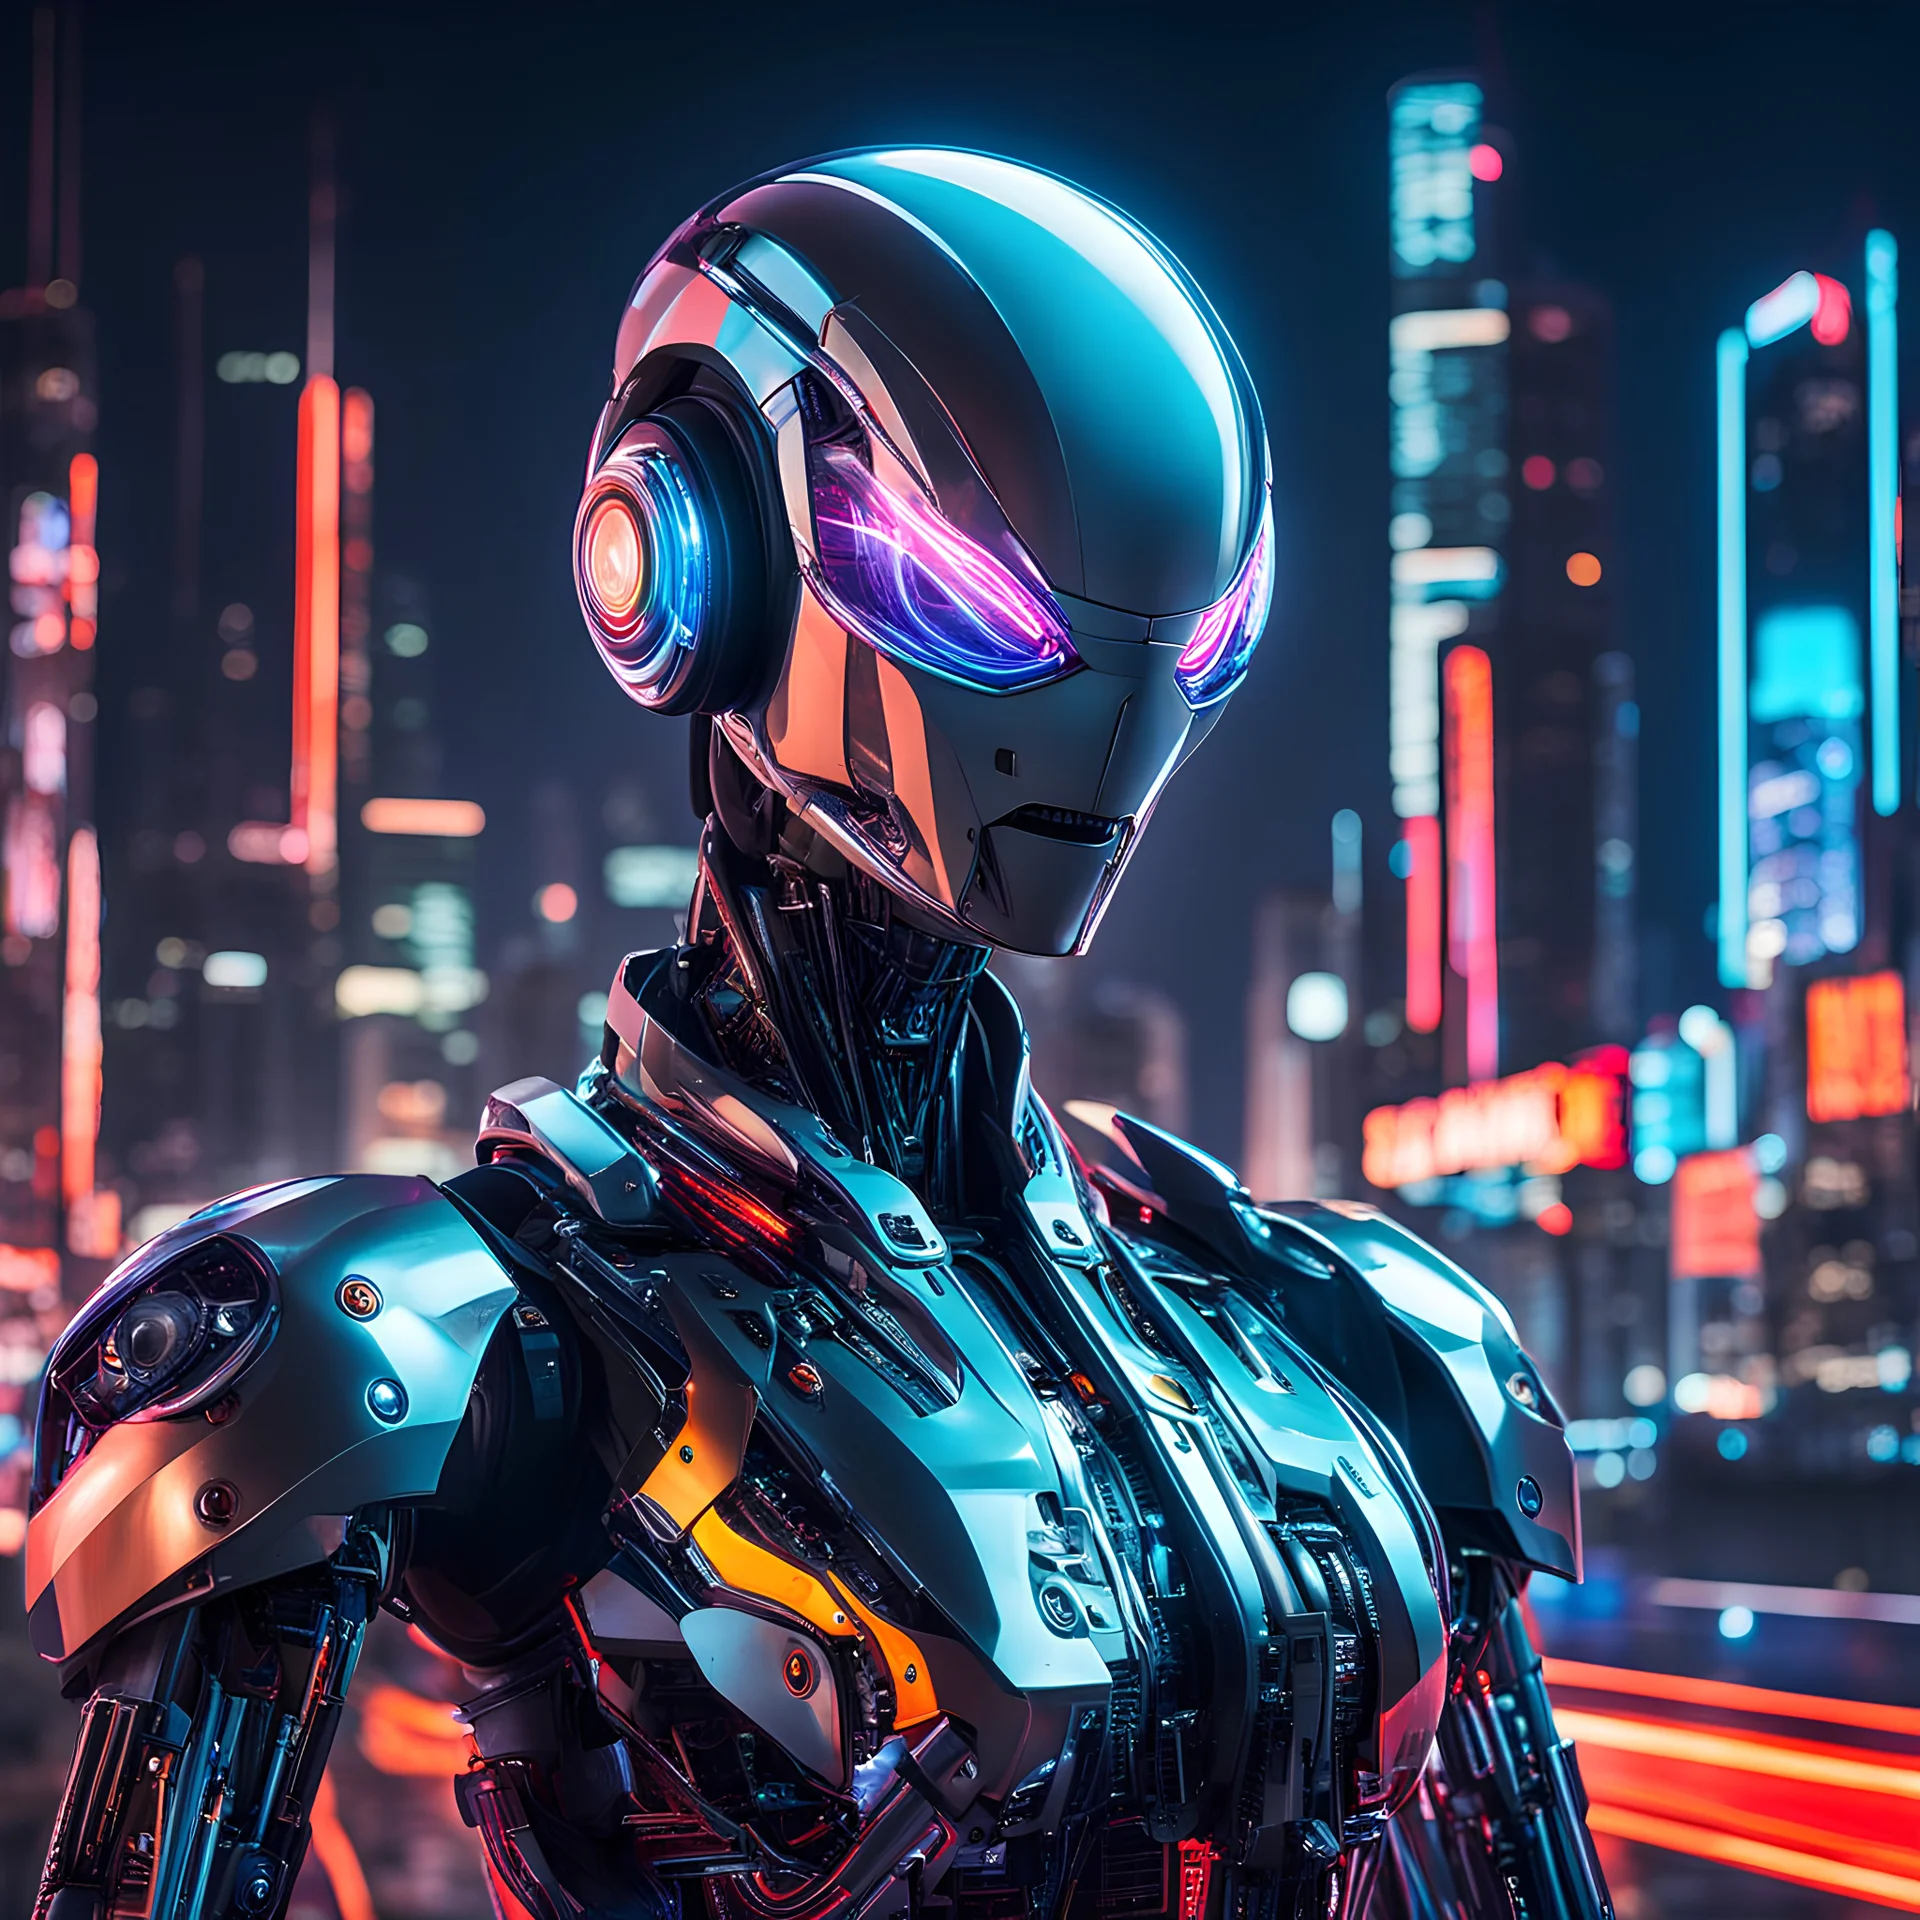 In the heart of this cybernetic revolution, I encountered a being unlike any other. Known simply as "Cyber," this enigmatic figure was a fusion of human and machine, a living testament to the wonders of technological advancements. With a drone hovering beside them, its sleek metallic body reflecting the neon lights that painted the cityscape, Cyber commanded attention wherever they went. Their presence was both captivating and disconcerting. Adorned in a gas mask that concealed their face, their